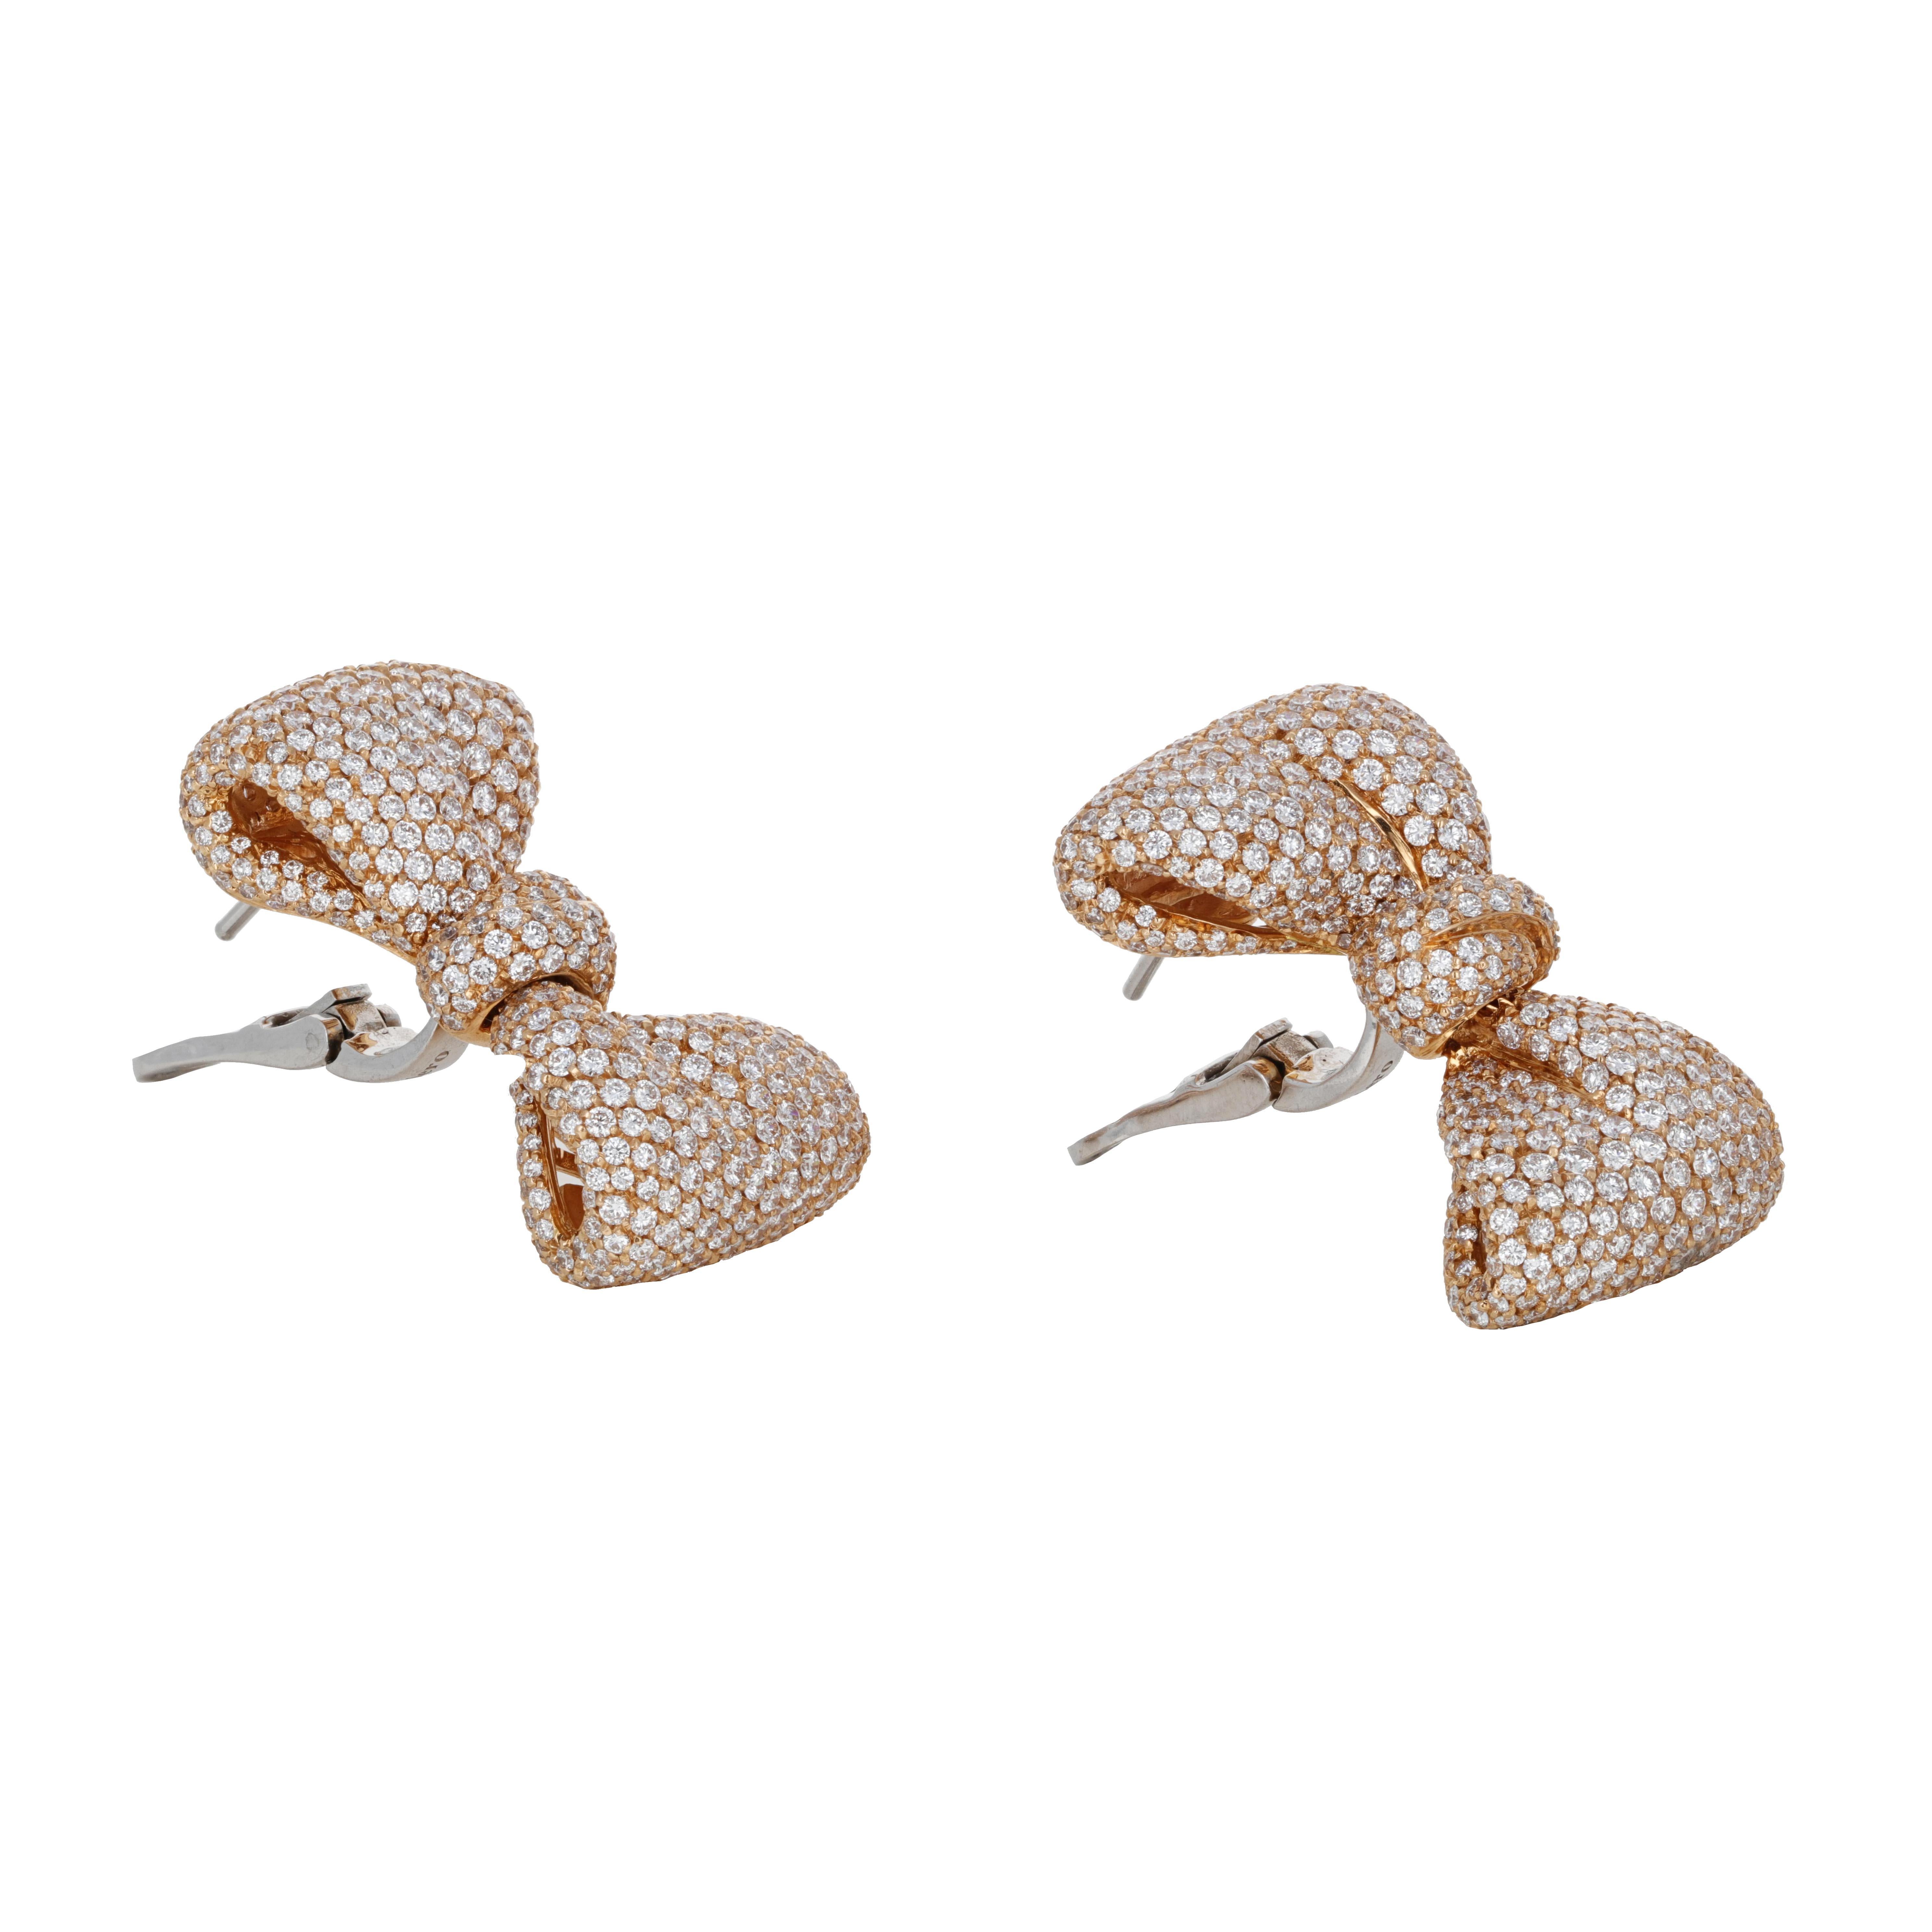 These 18 karat yellow gold diamond bow earrings are signed by the Italian designer Palmiero. These earrings have a lever back and drop from the ear very nicely. 

There is a total weight of 9.48 carats in round brilliant diamonds.

Signed Palmiero